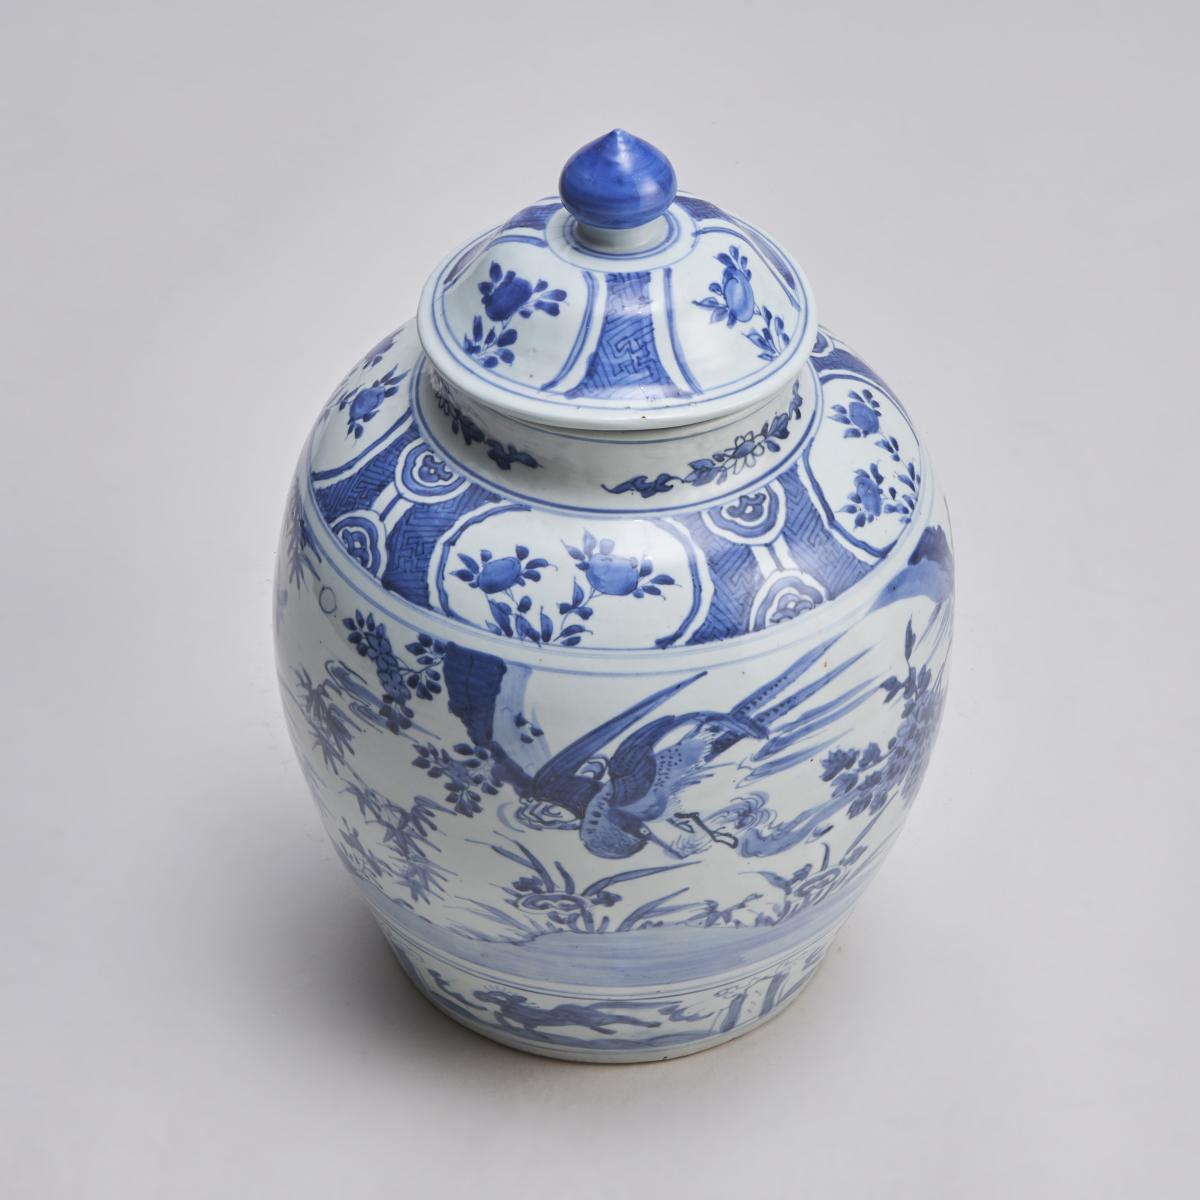 A large, early 19th Century Chinese blue and white covered porcelain jar with interesting decoration